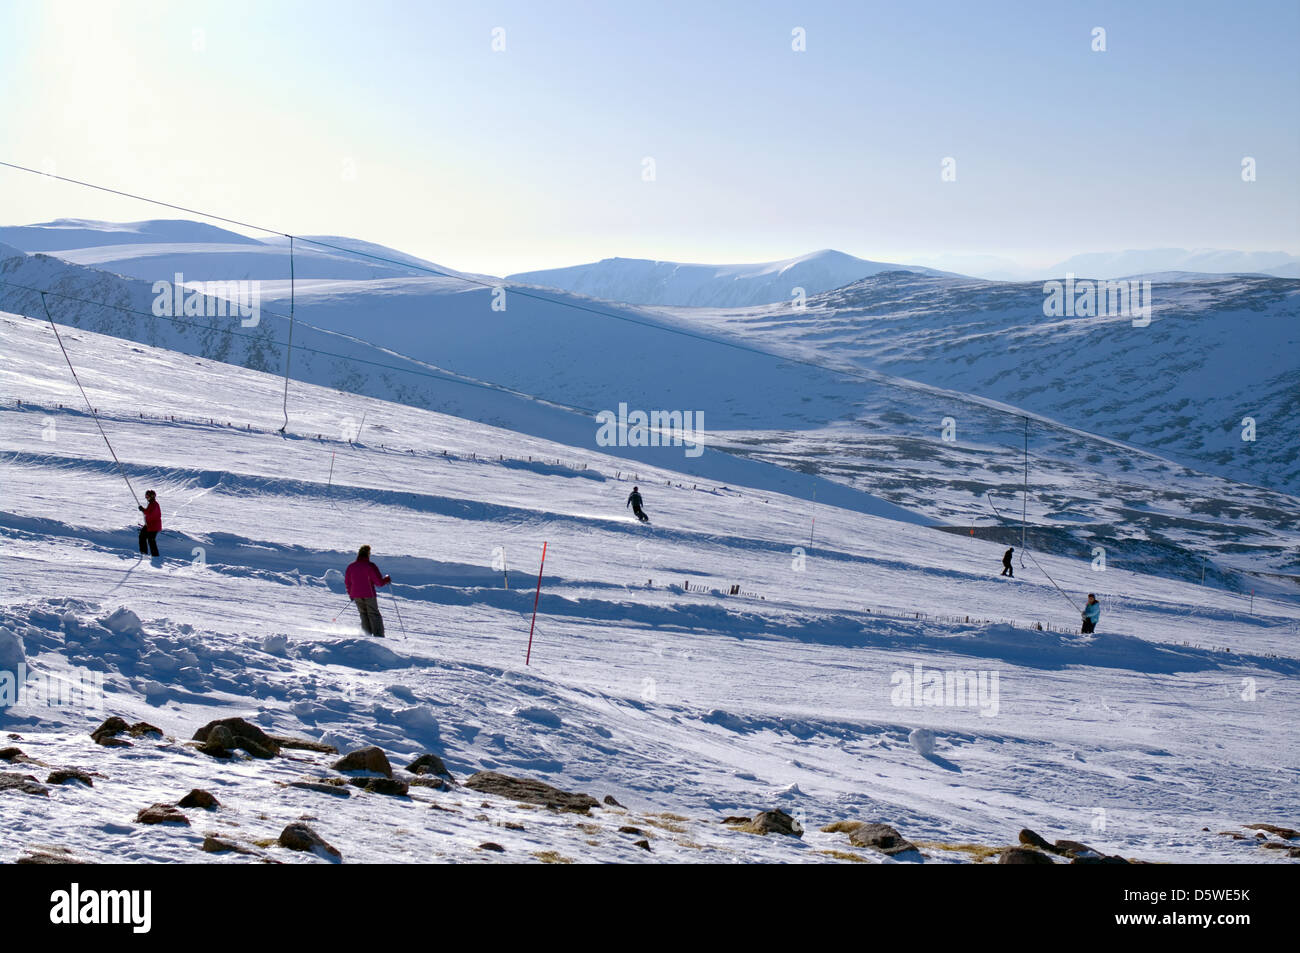 Skiers & snowboarders on tows and runs, seen from the Ptarmigan viewing terrace, Cairngorm Mountain Ski Centre Aviemore Scotland Stock Photo